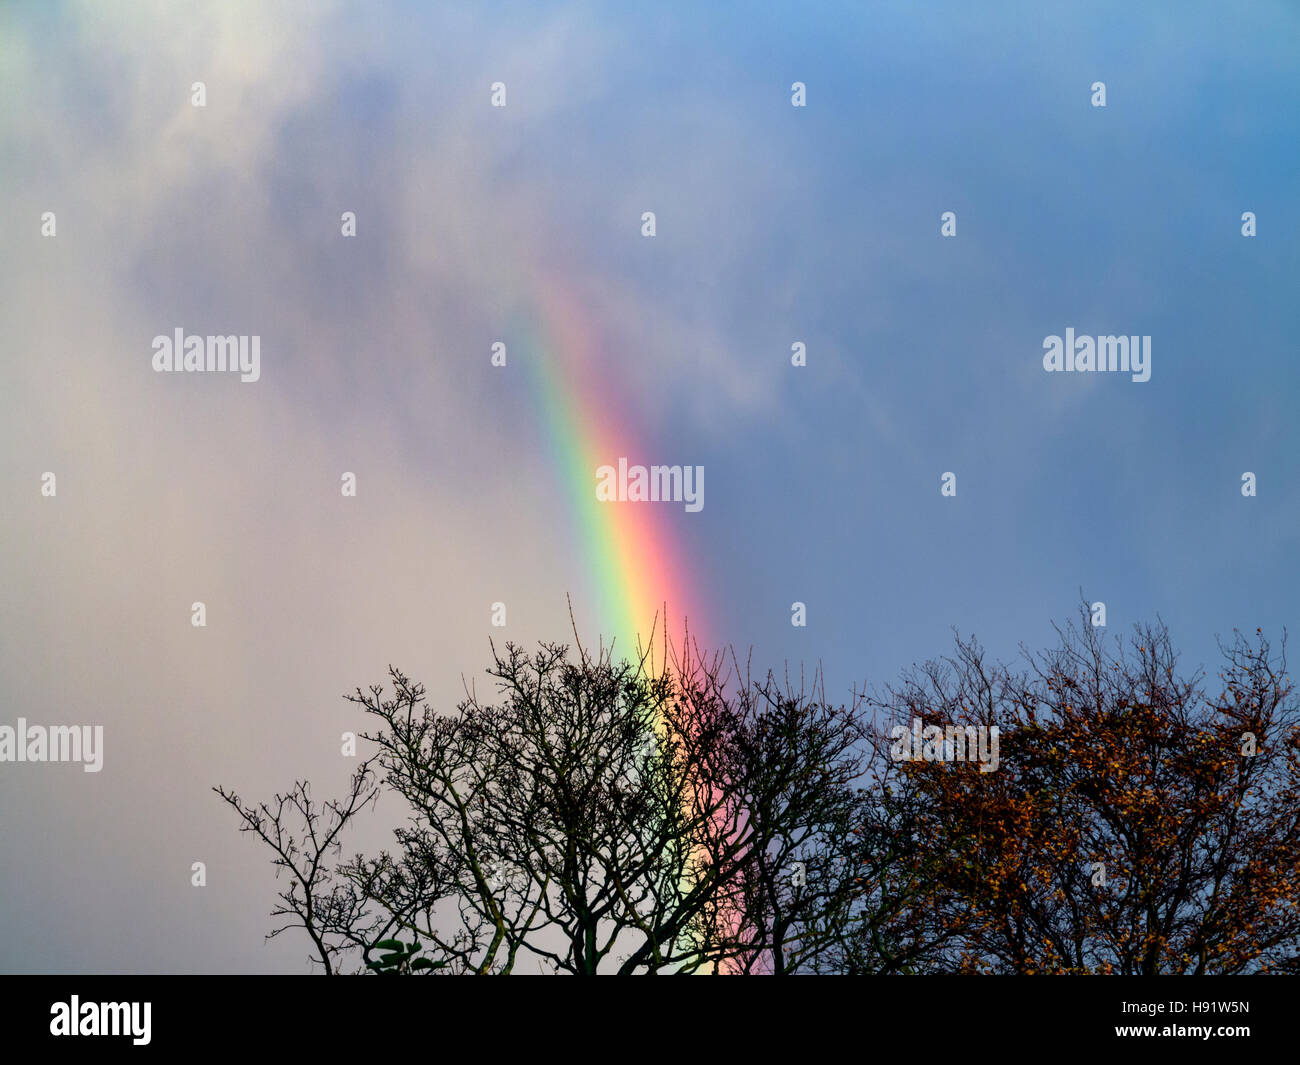 A vivid section of a rainbow behind a leafless tree top with stormy sky Stock Photo